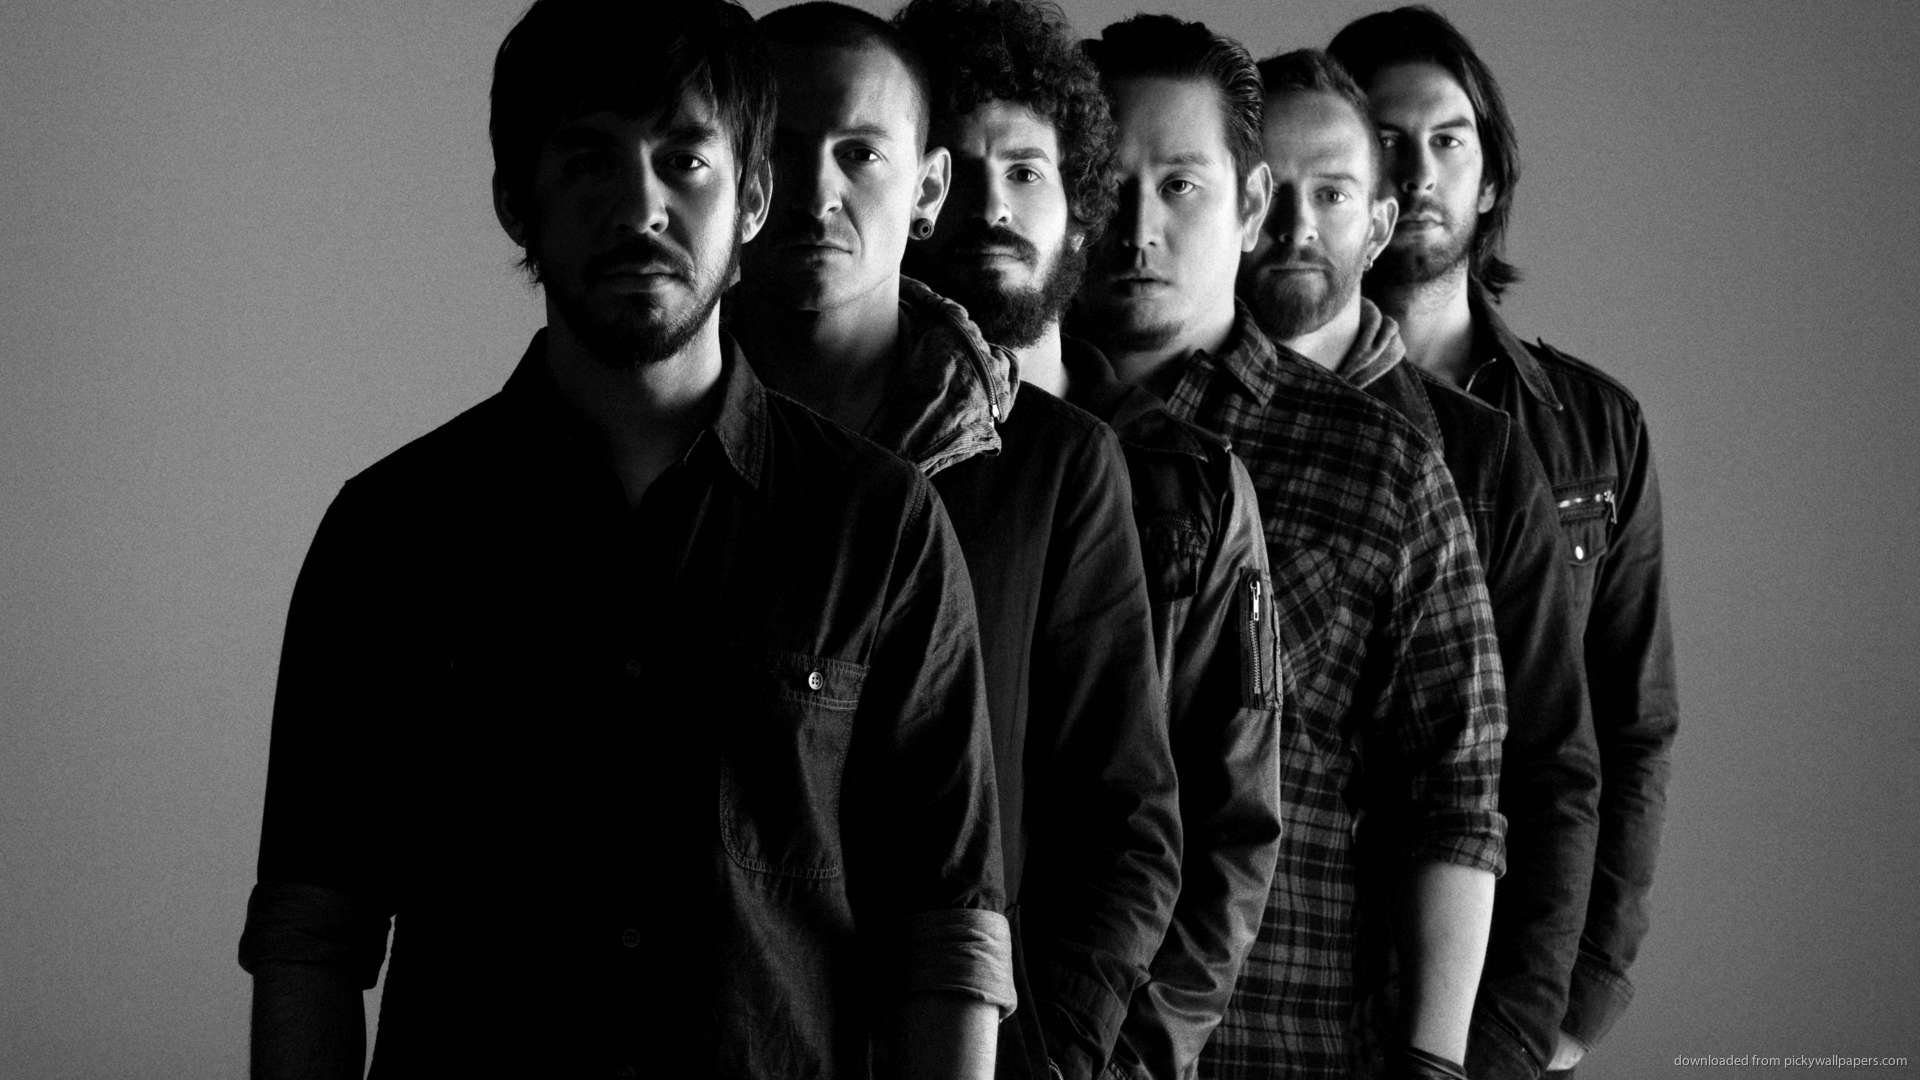 Download 1920x1080 Linkin Park Behind Each Other Wallpaper